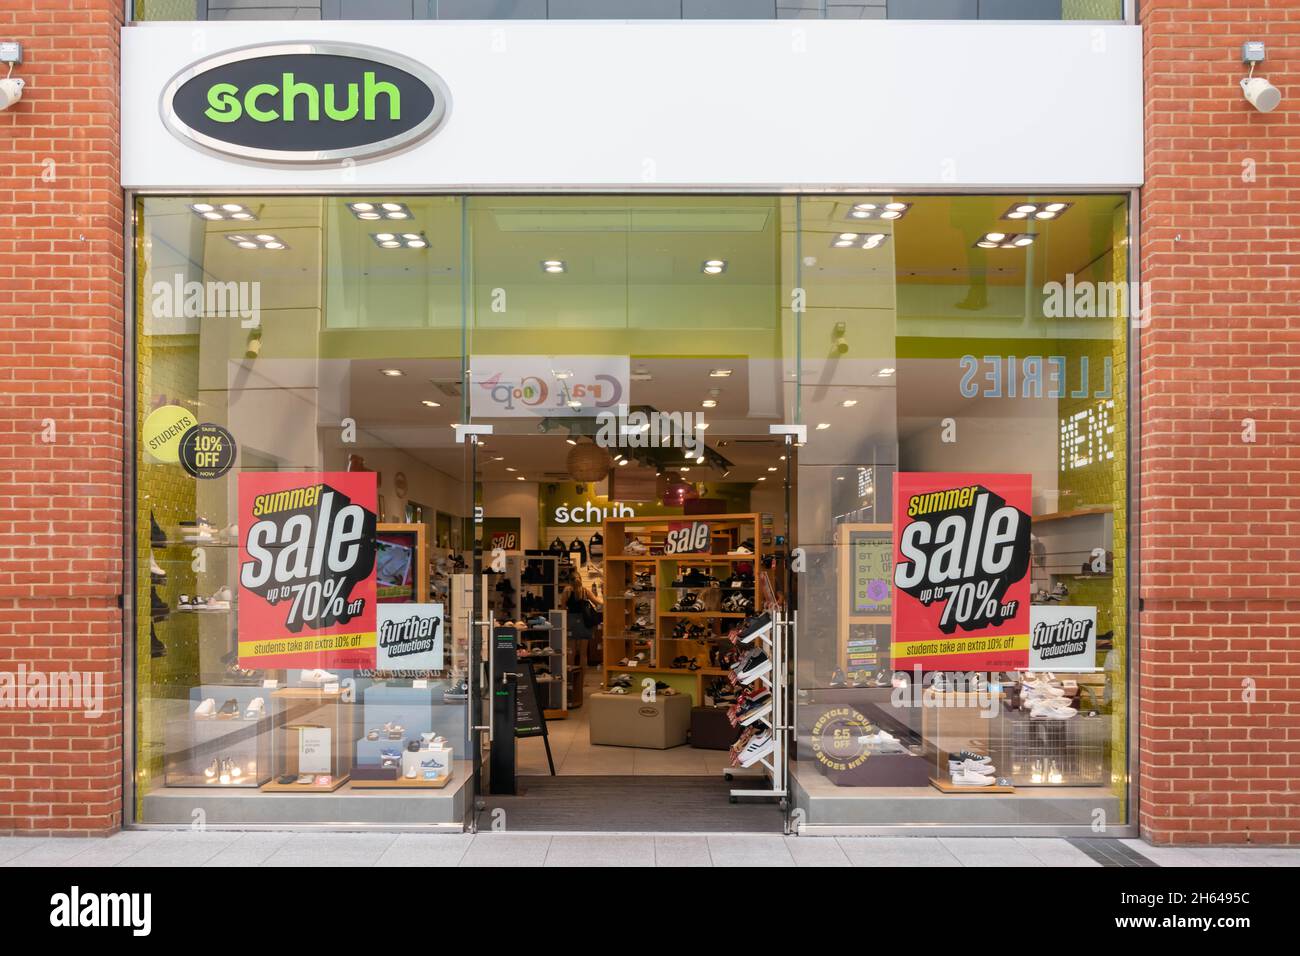 Geologie West Omleiding Schuh Stores High Resolution Stock Photography and Images - Alamy